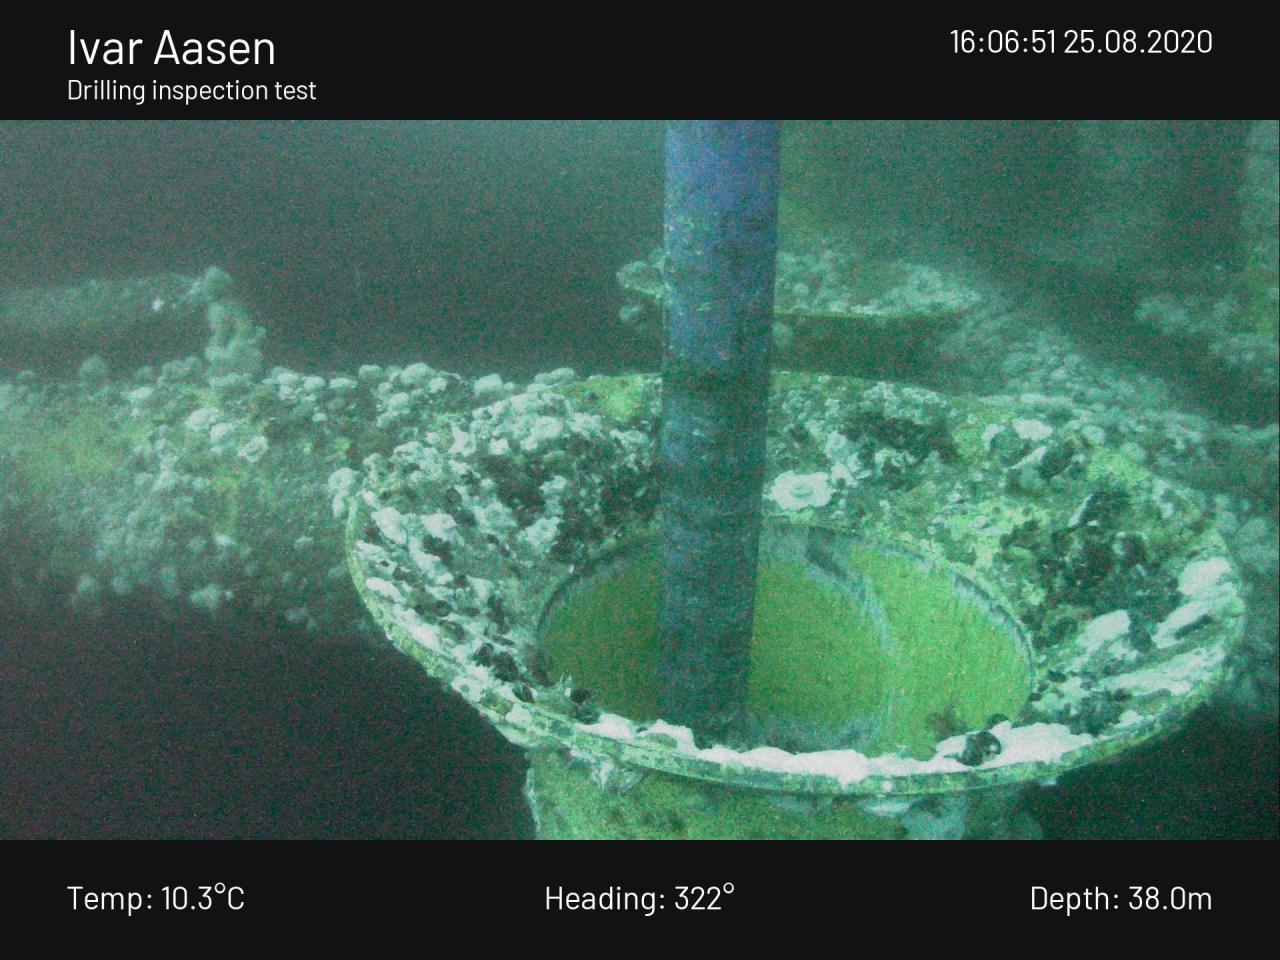 Second conductor guide at 38 m depth